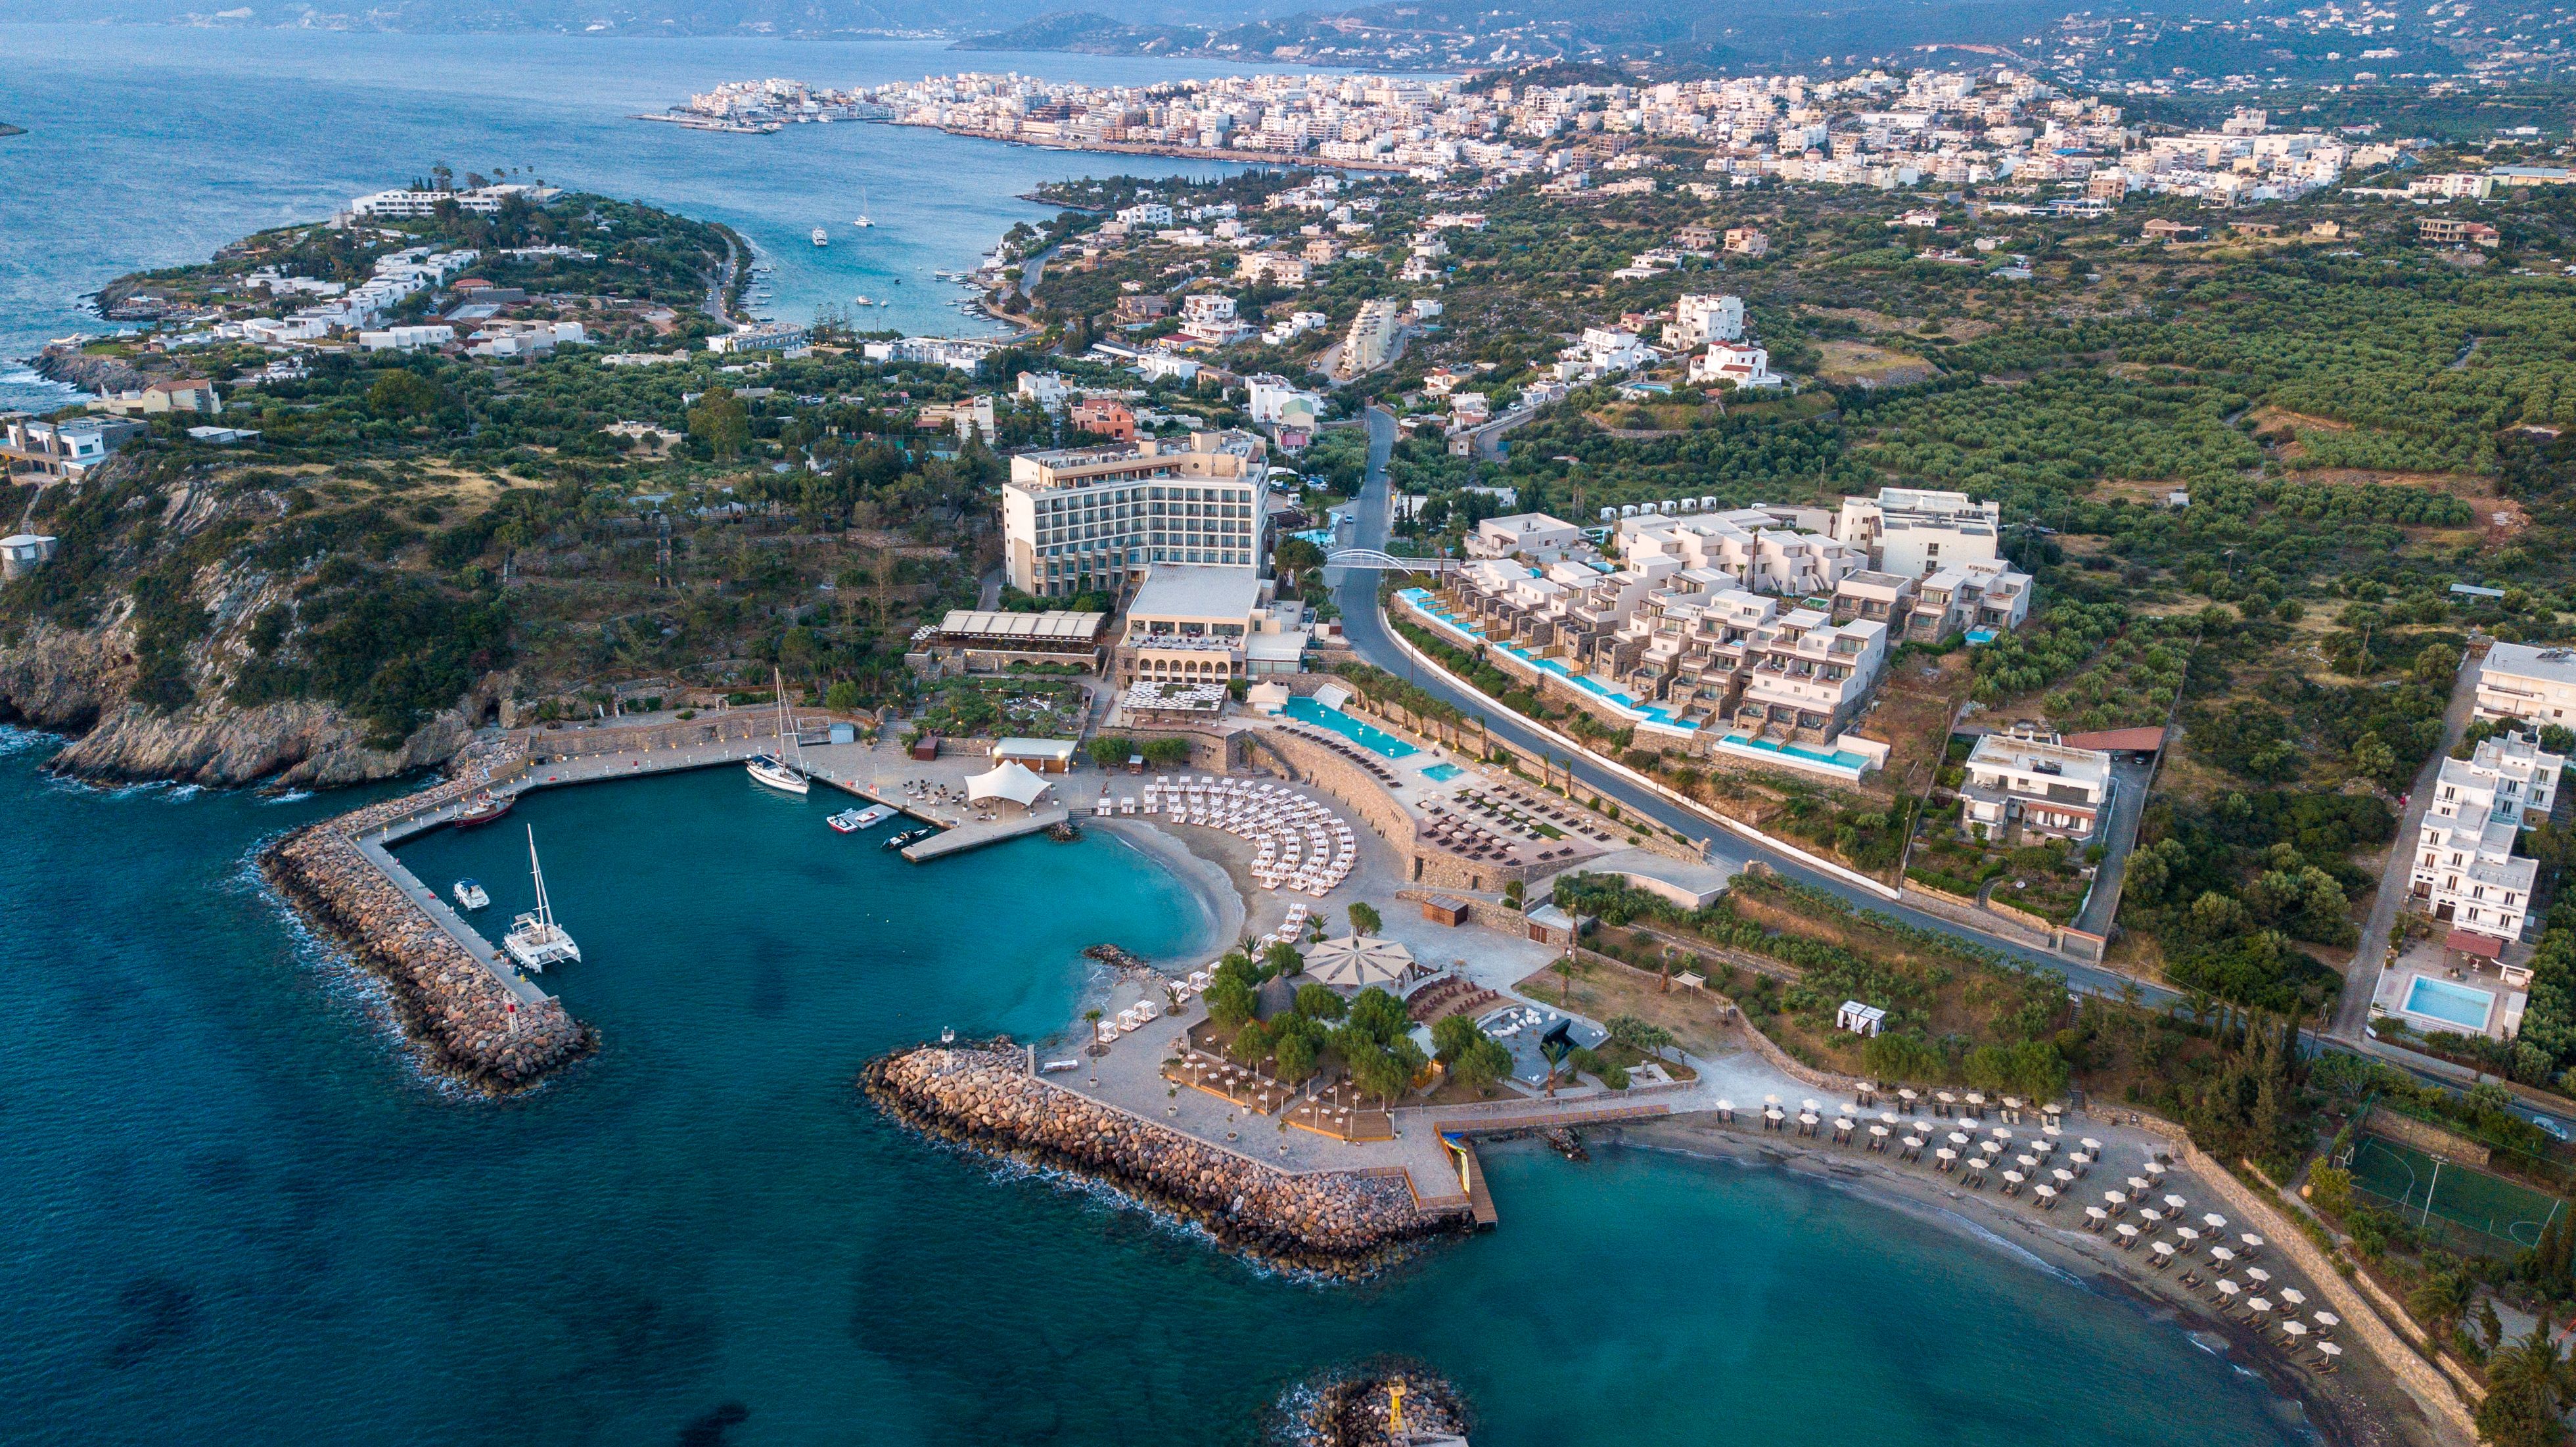 Wyndham Grand Crete Mirabello Bay Re-opens after Major Renovation Project with New Look Inspired by Local Surroundings